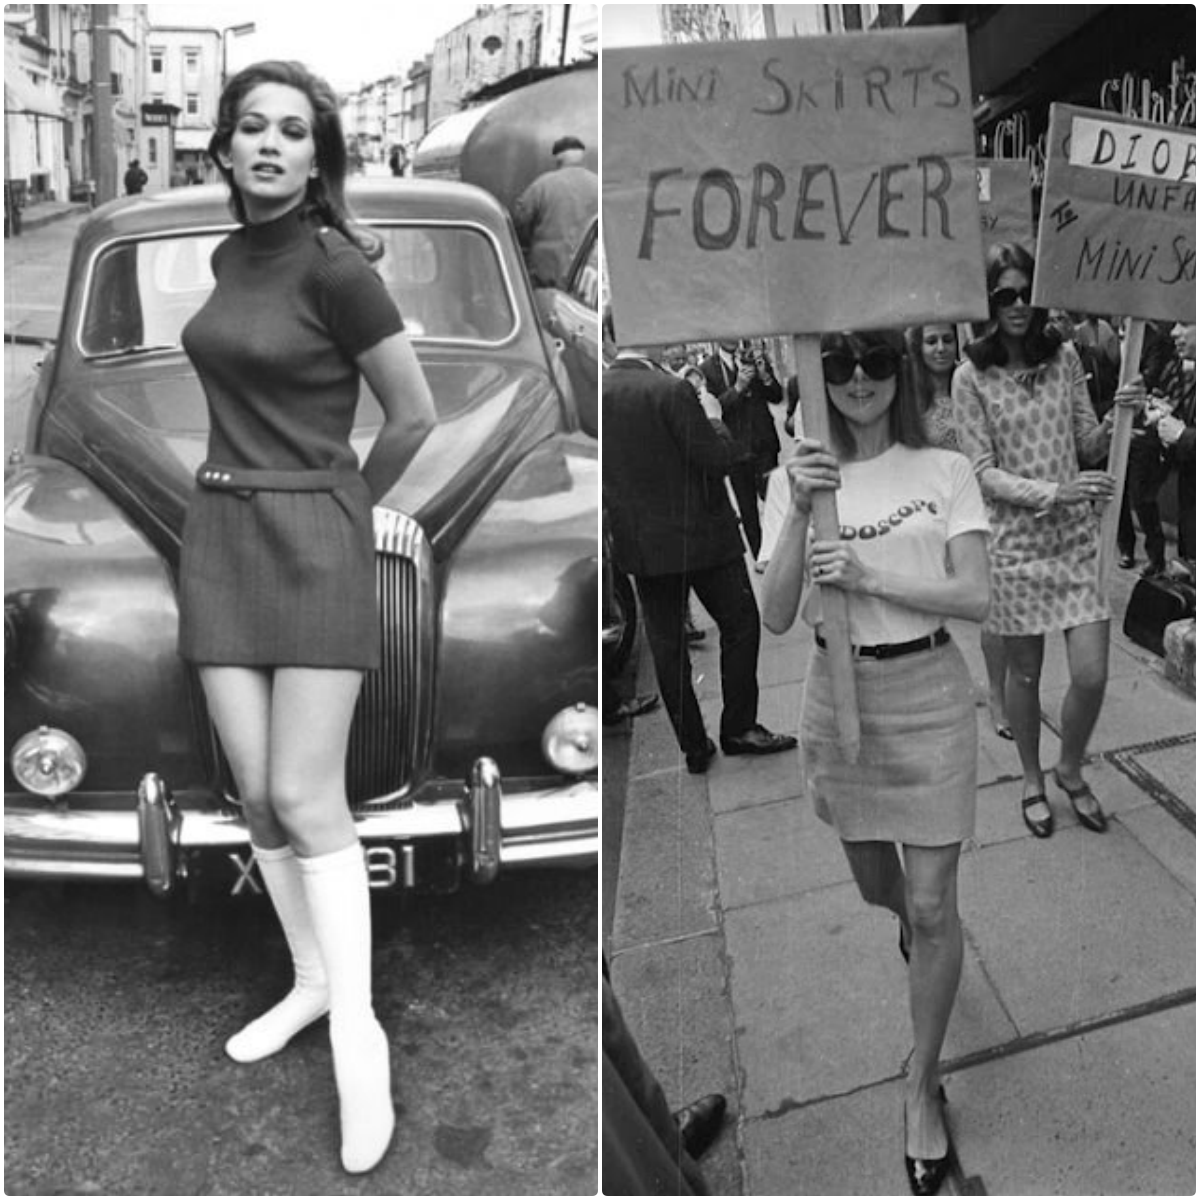 The Sexiest Fashion in the 20th Century – Stunning Vintage Photos of Street Girls in Their Miniskirts in the 1960s